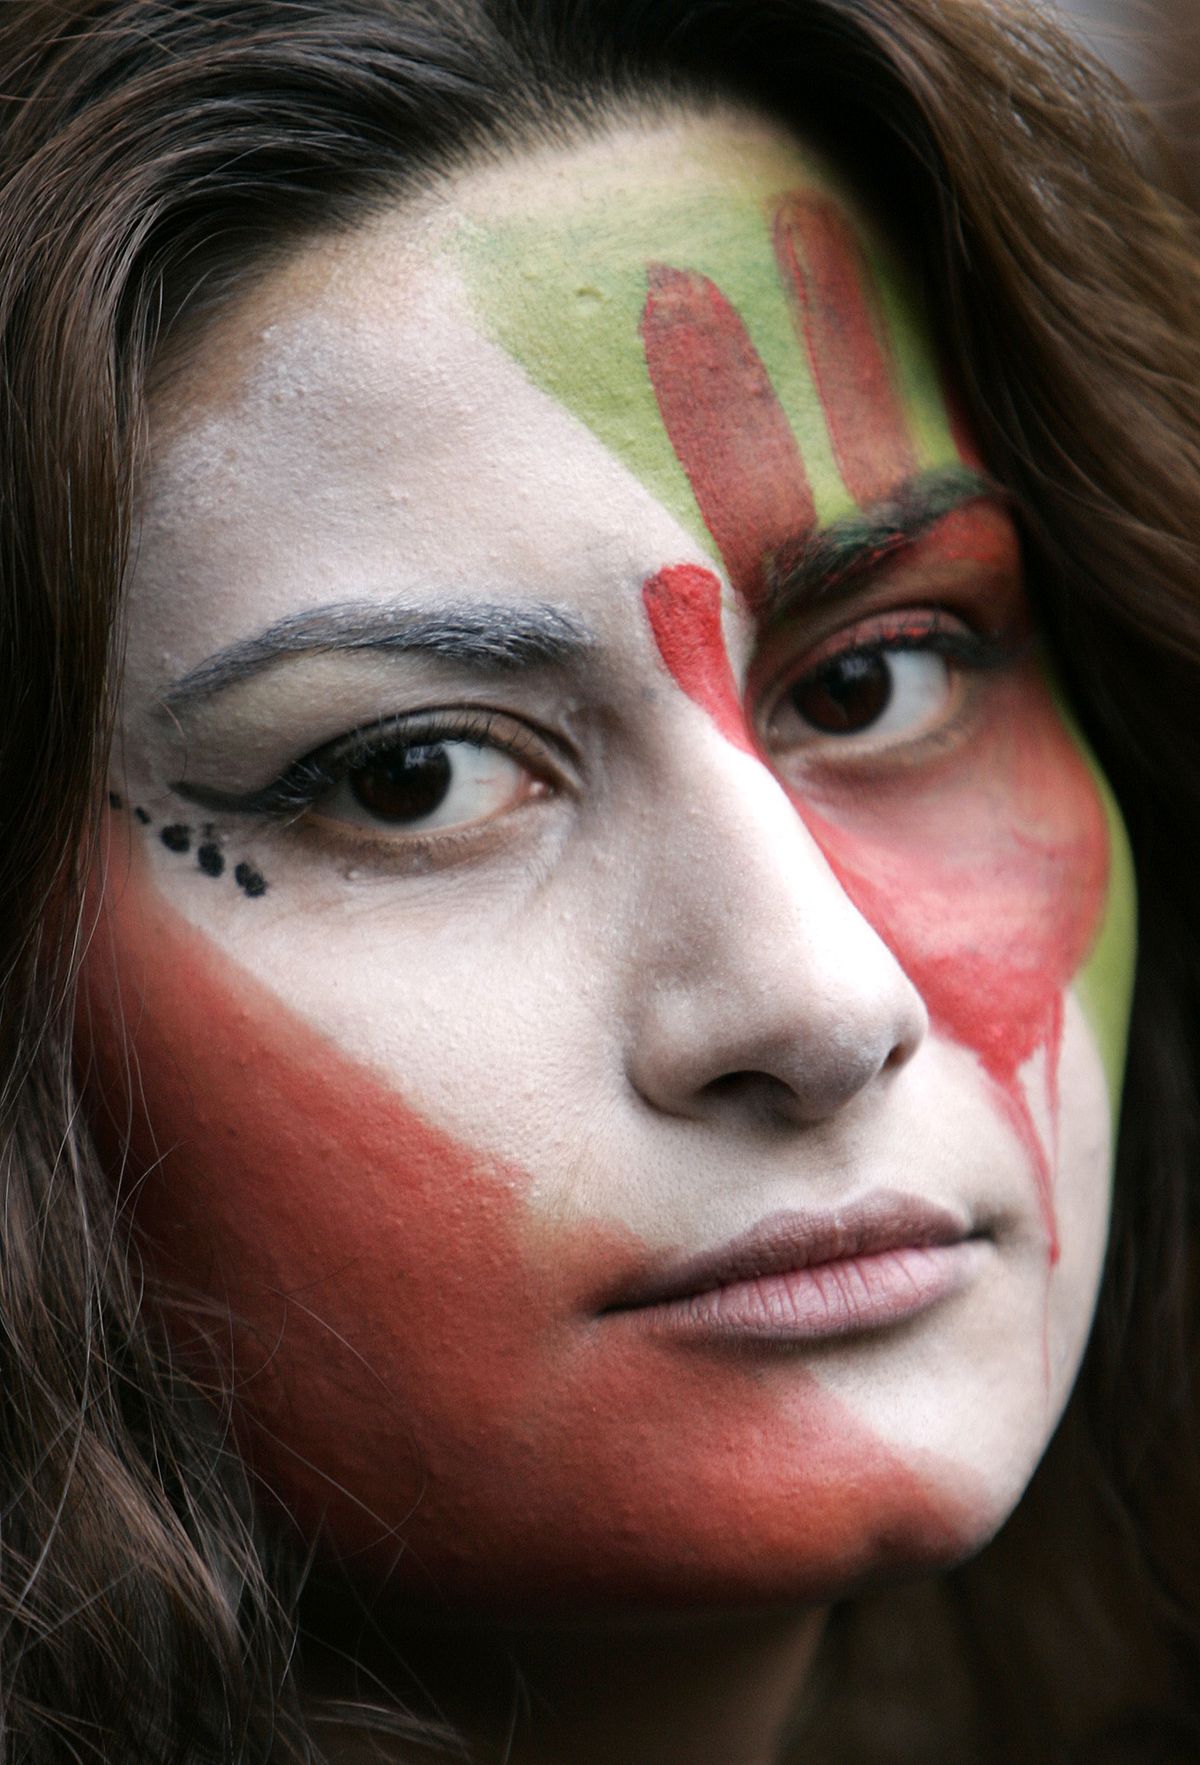 A protester’s face is painted in the colors of the Iranian flag with a blooded hand, outside the Iranian Embassy in London on Thursday. (Akira Suemori / The Spokesman-Review)